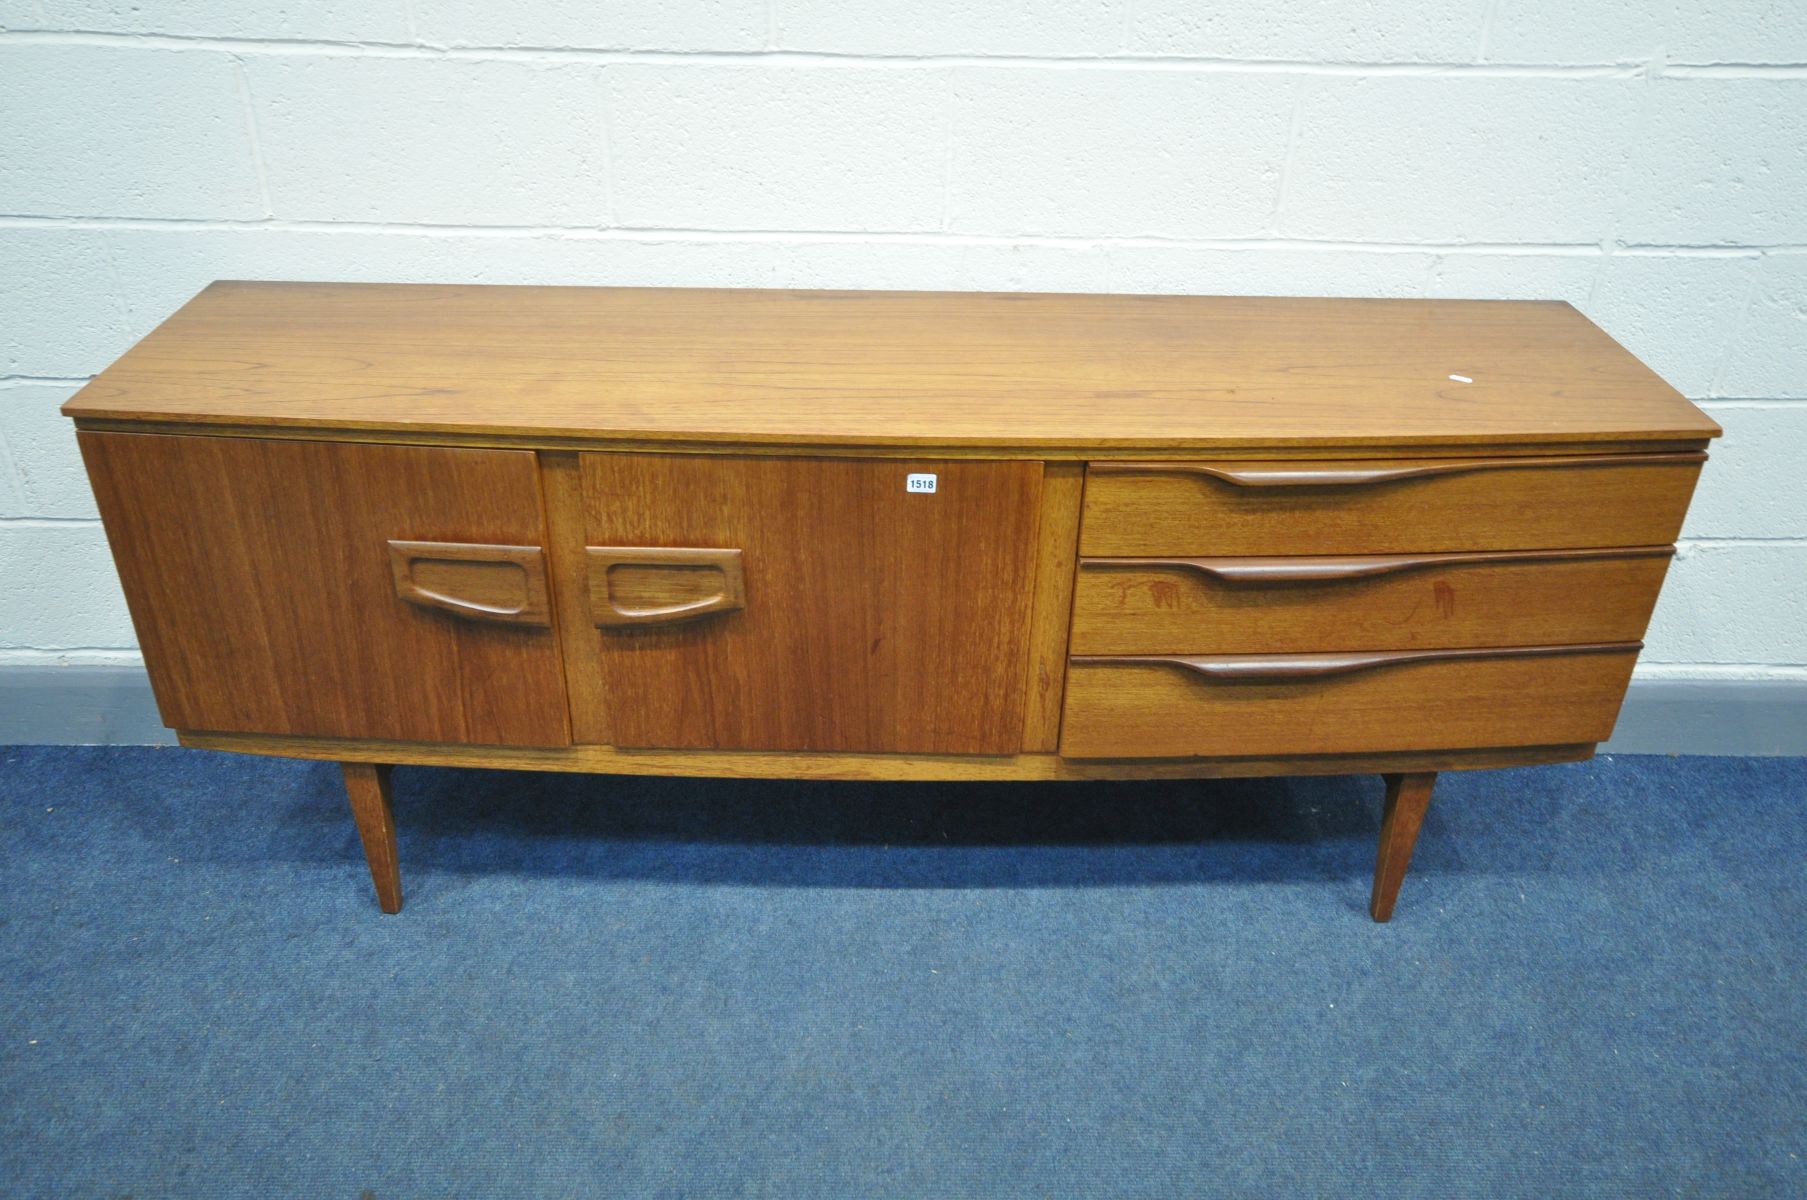 A MID CENTURY BEAUTILITY TEAK SIDEBOARD, with double cupboard doors, besides three drawers,